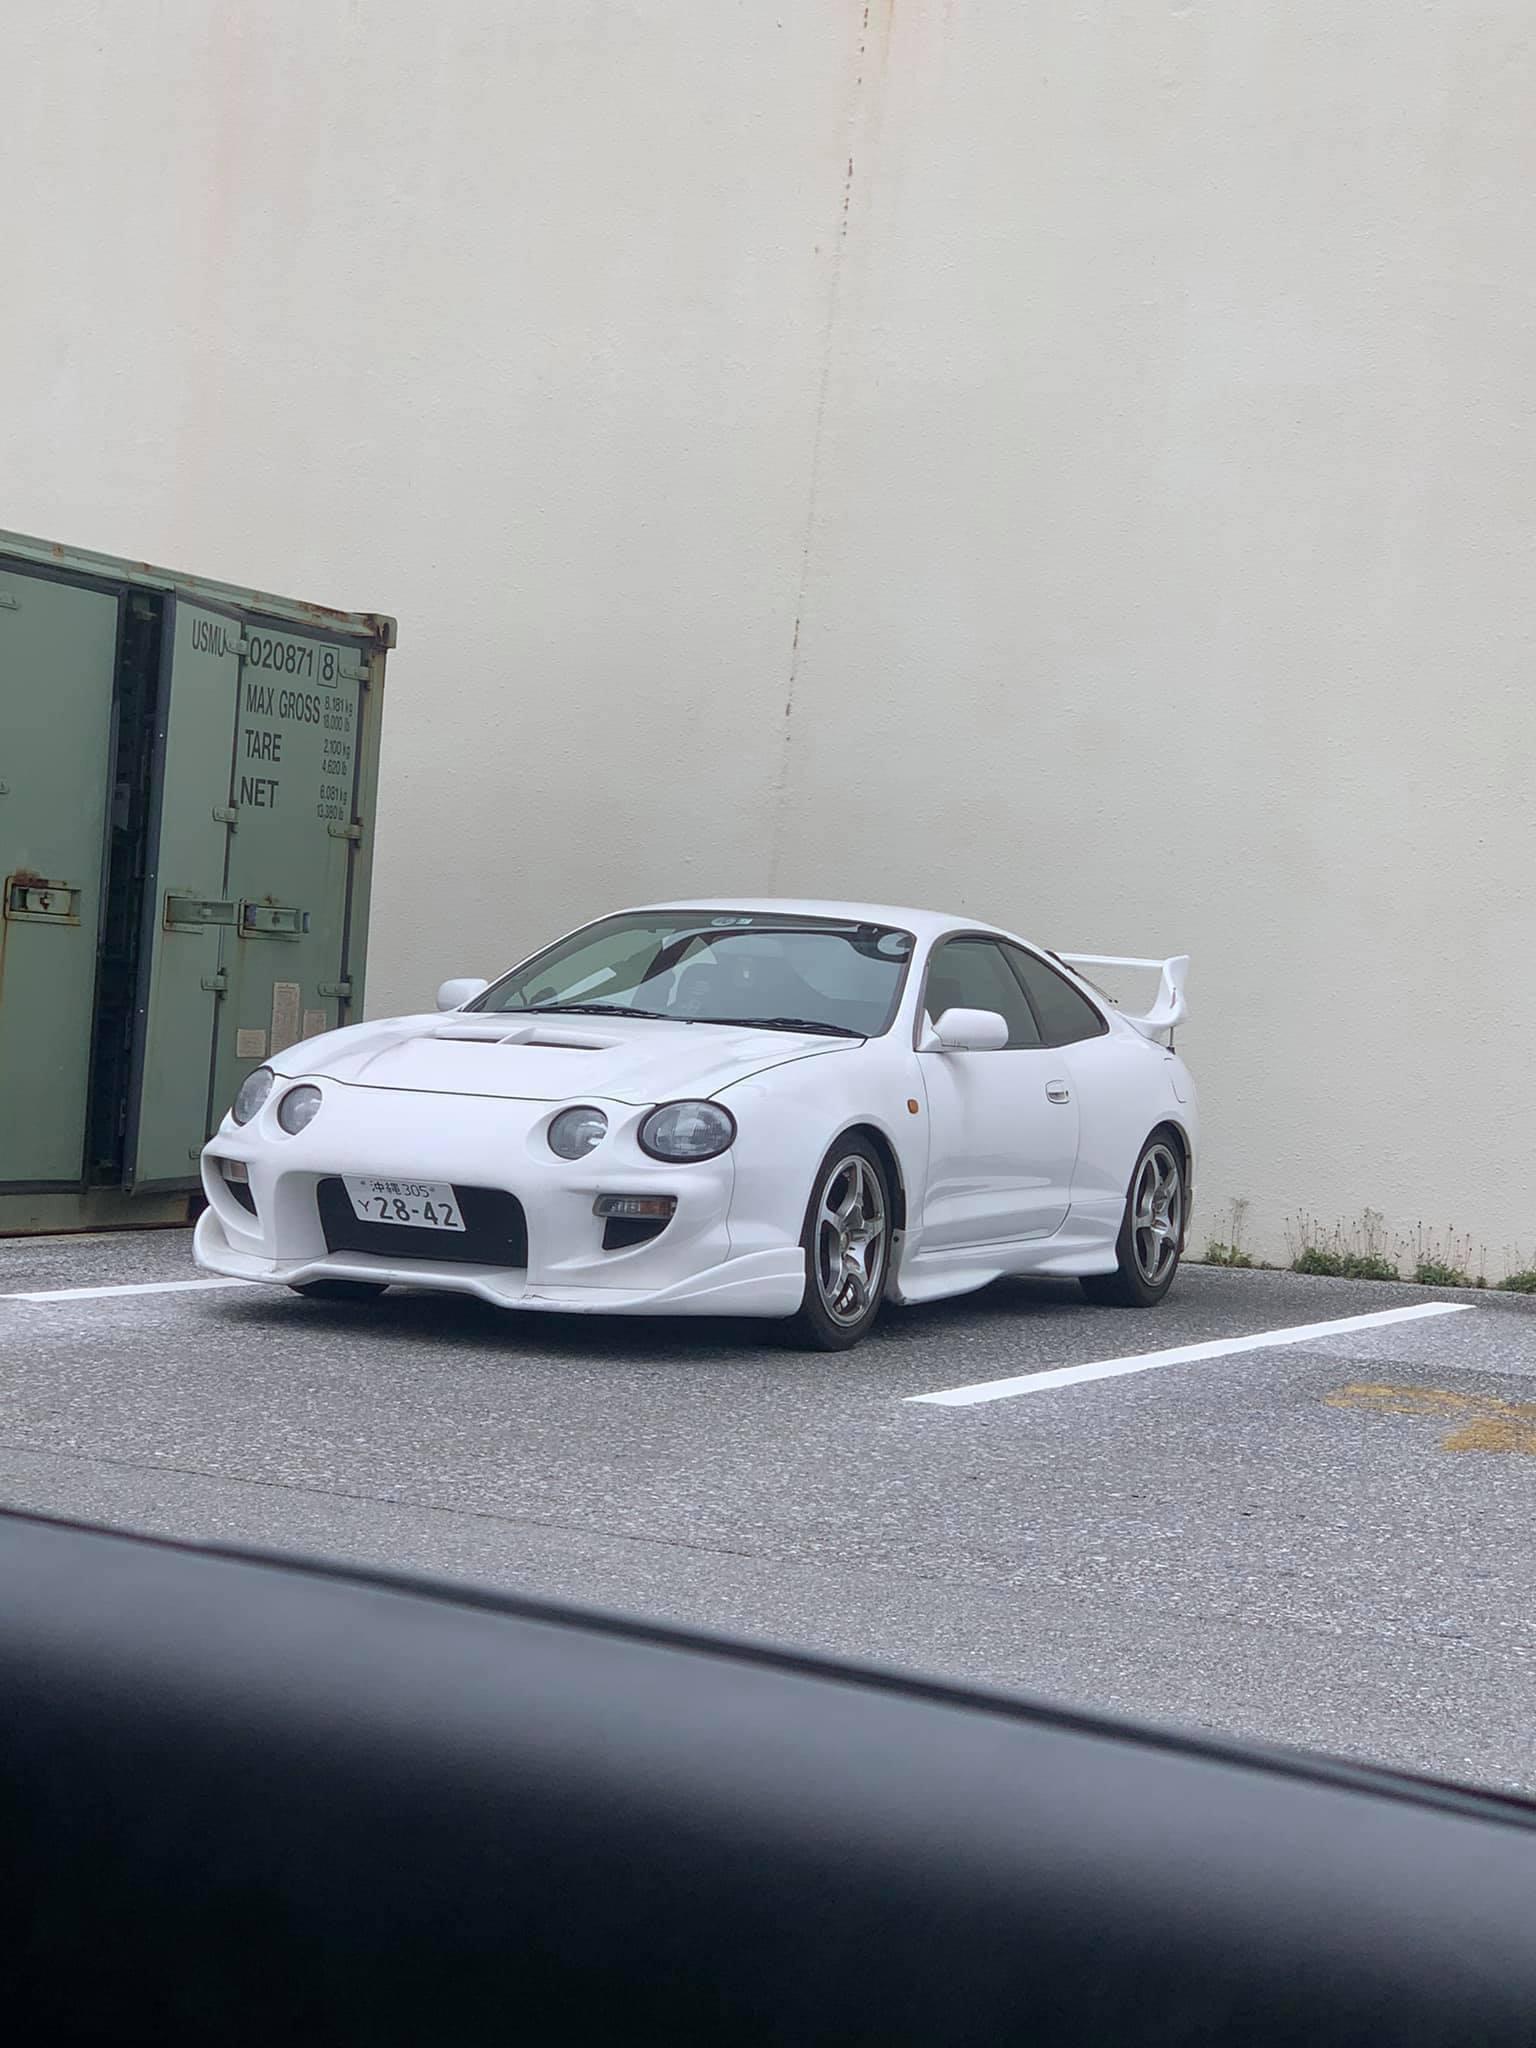 Hey I just brought a 1998 Toyota celica SS-III I just wanted to know if the  E-ST202-BLMZF body is the same as the GT-4. I'm looking into body kits and  I just